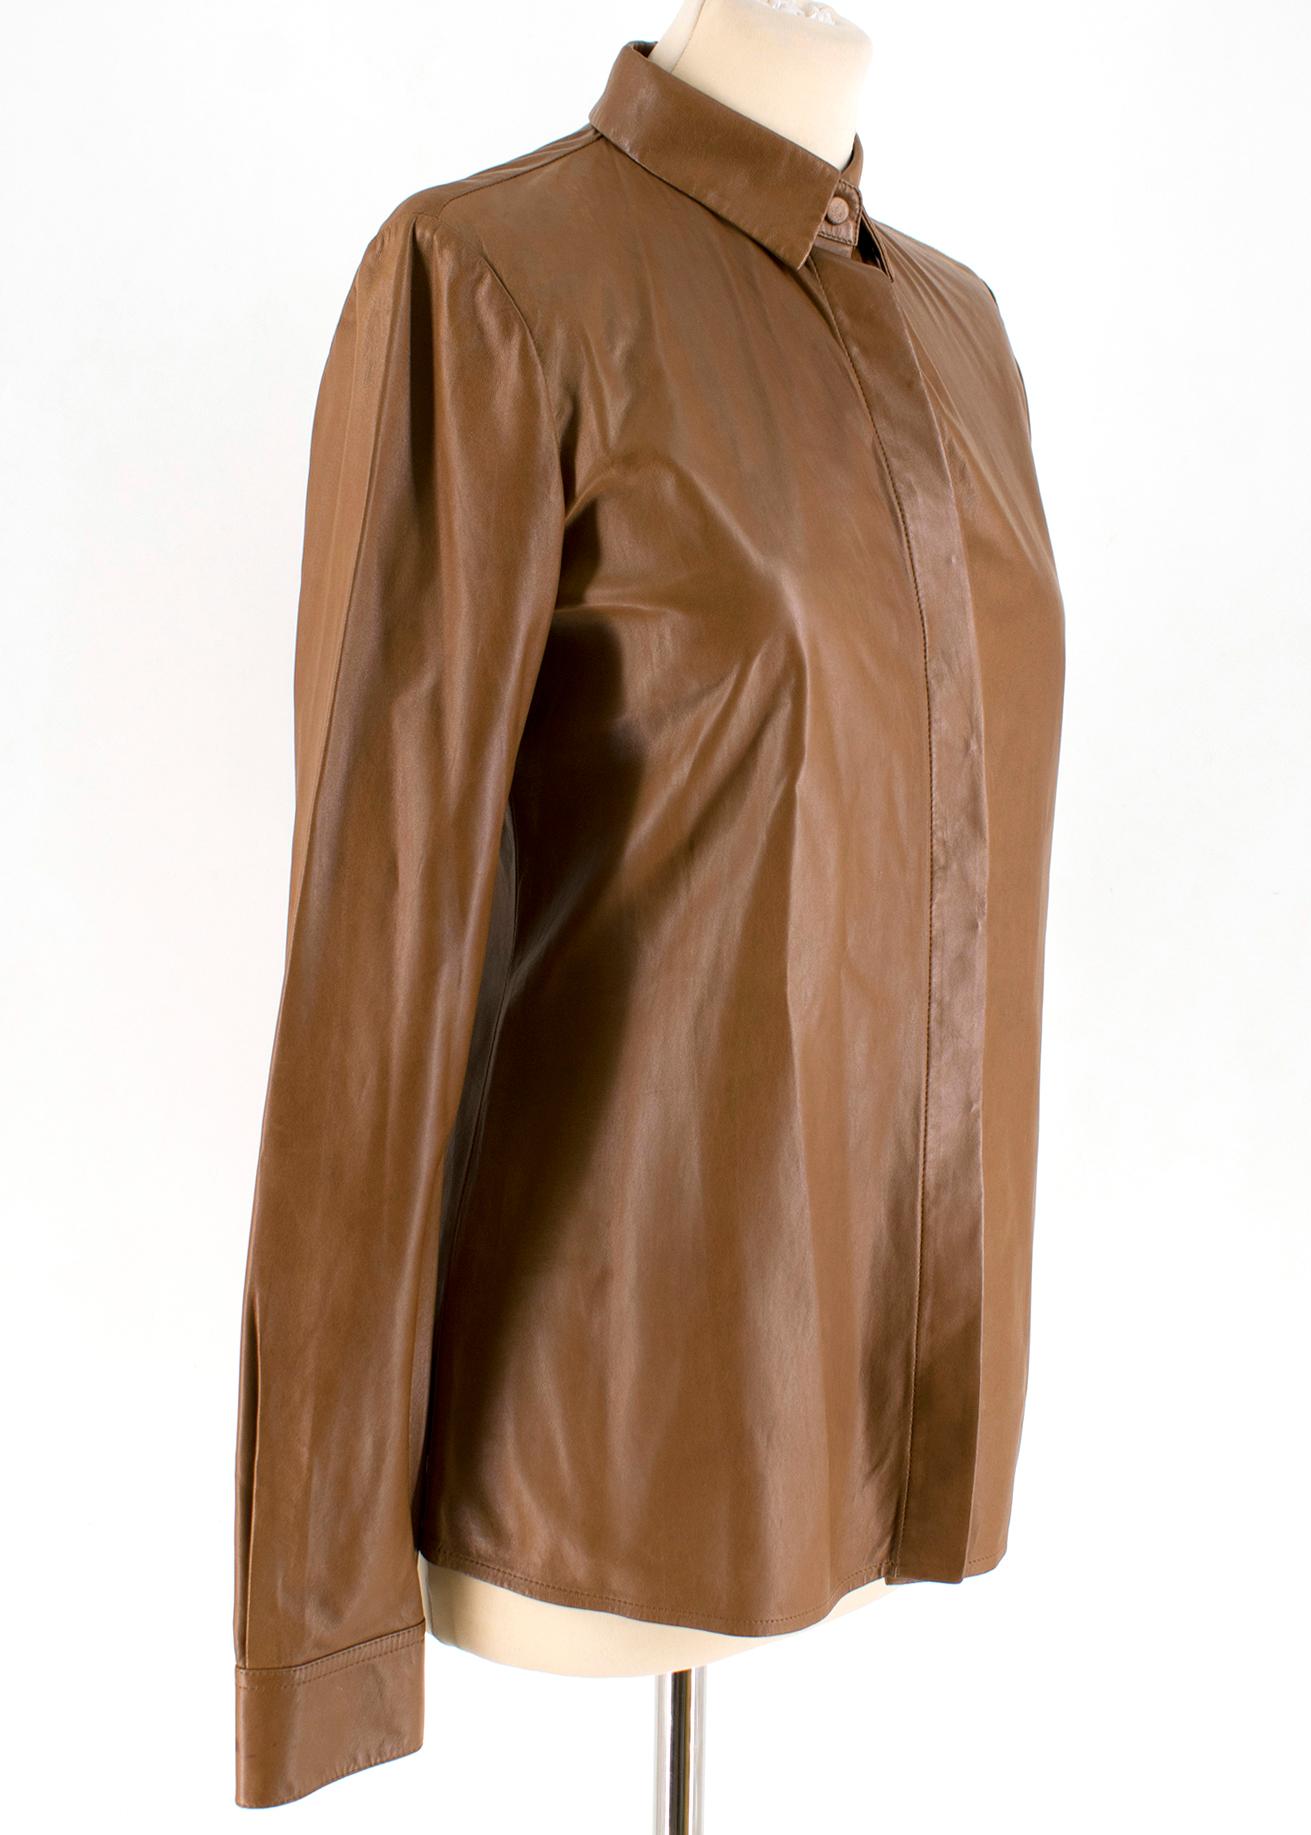 Gucci Leather Shirt 

Soft, fine leather 
Nut brown button down 
Point collar 
Button fixtures hidden when buttoned up
Buttoned cuffs 
Supple and lightweight

Please note, these items are pre-owned and may show some signs of storage, even when